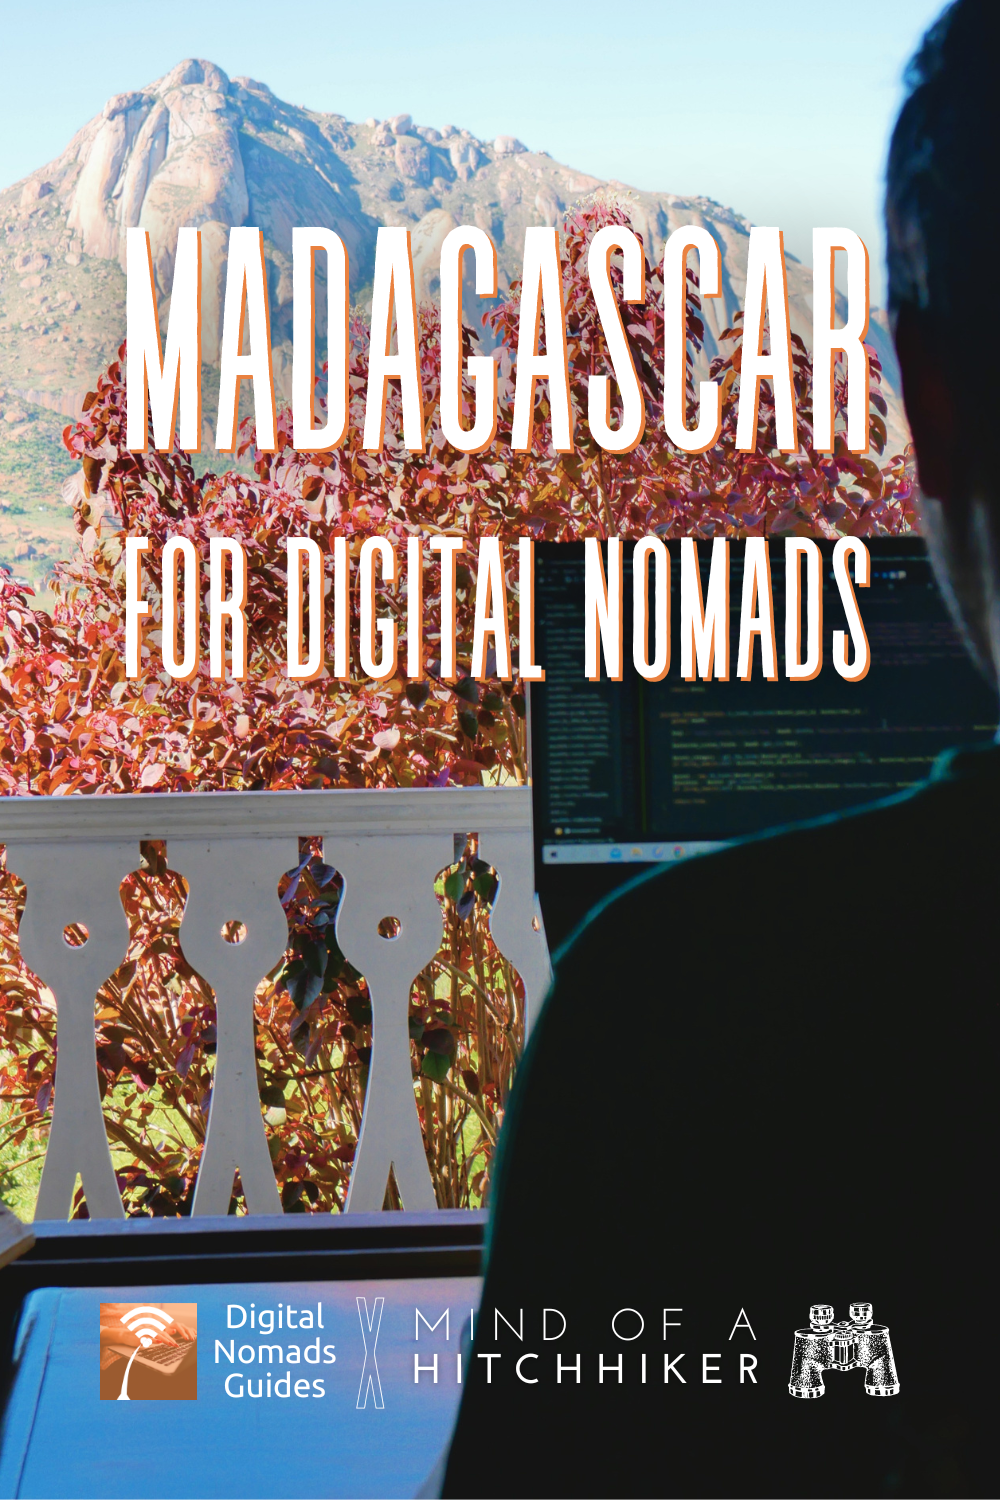 Who can work from Madagascar for digital nomads